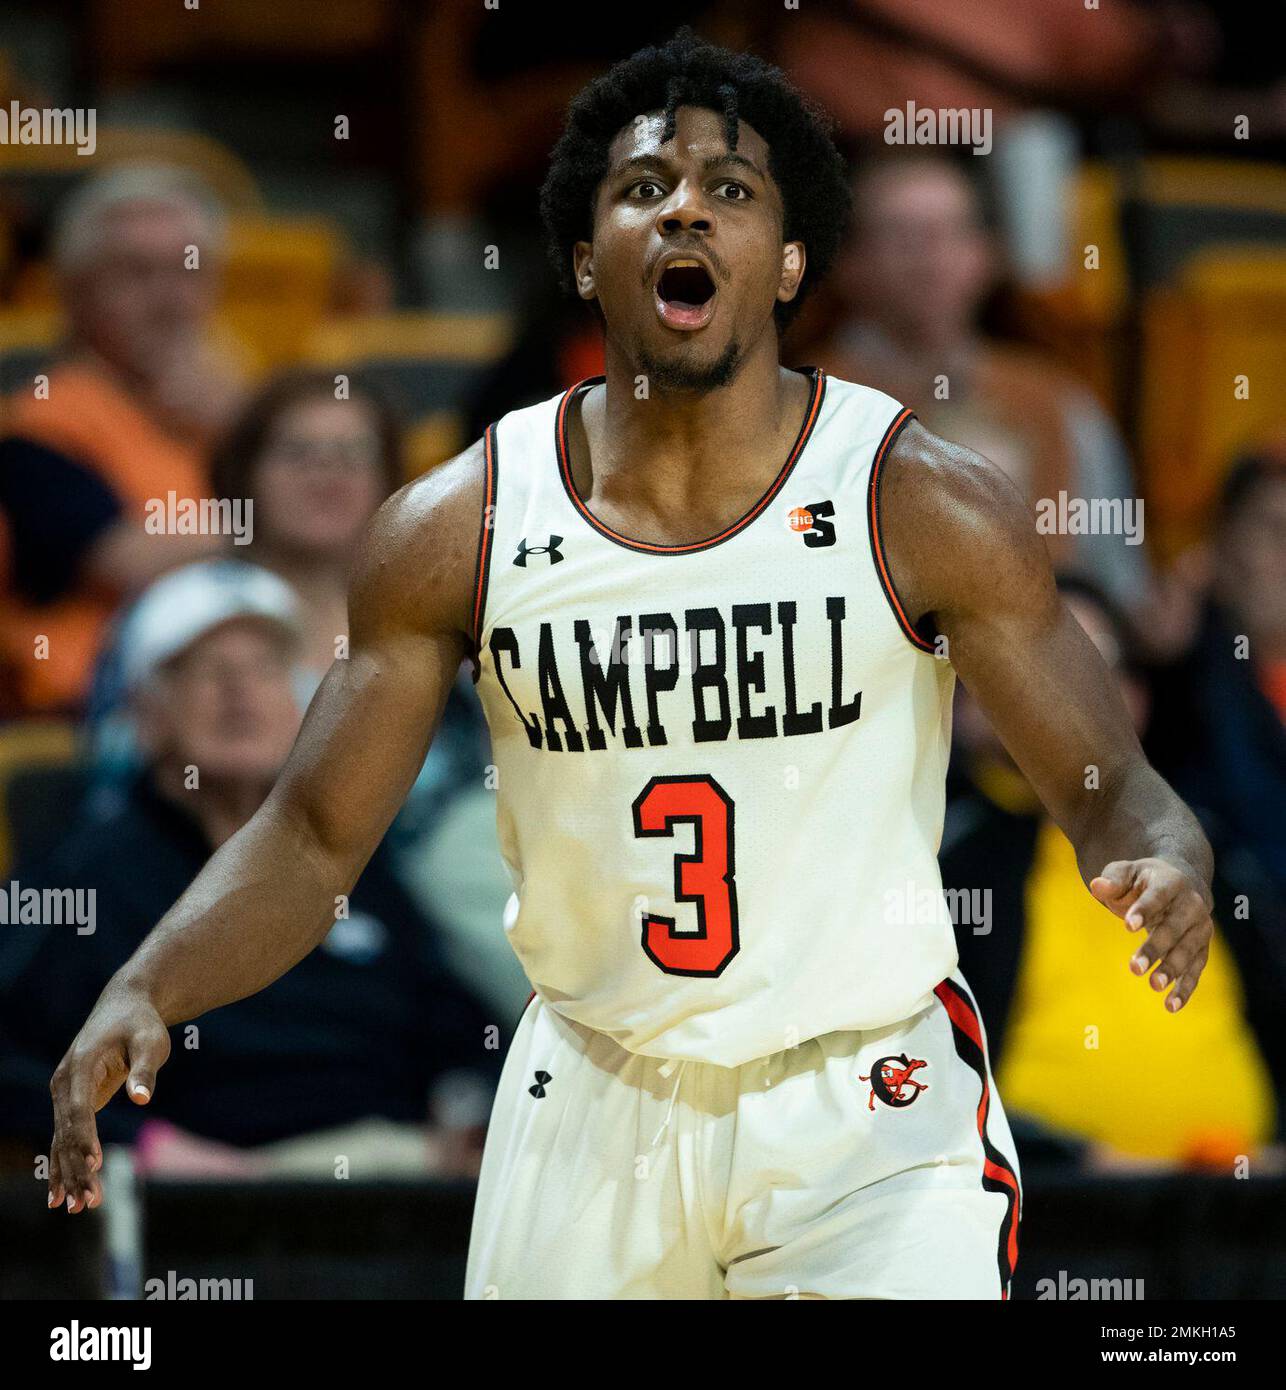 HOLD FOR RELEASE TBA** Campbell University guard Chris Clemons reacts  against Presbyterian College in the second half of an NCAA basketball game  Thursday, Jan. 24, 2019 in Buies Creek, N.C. (AP Photo/Jason